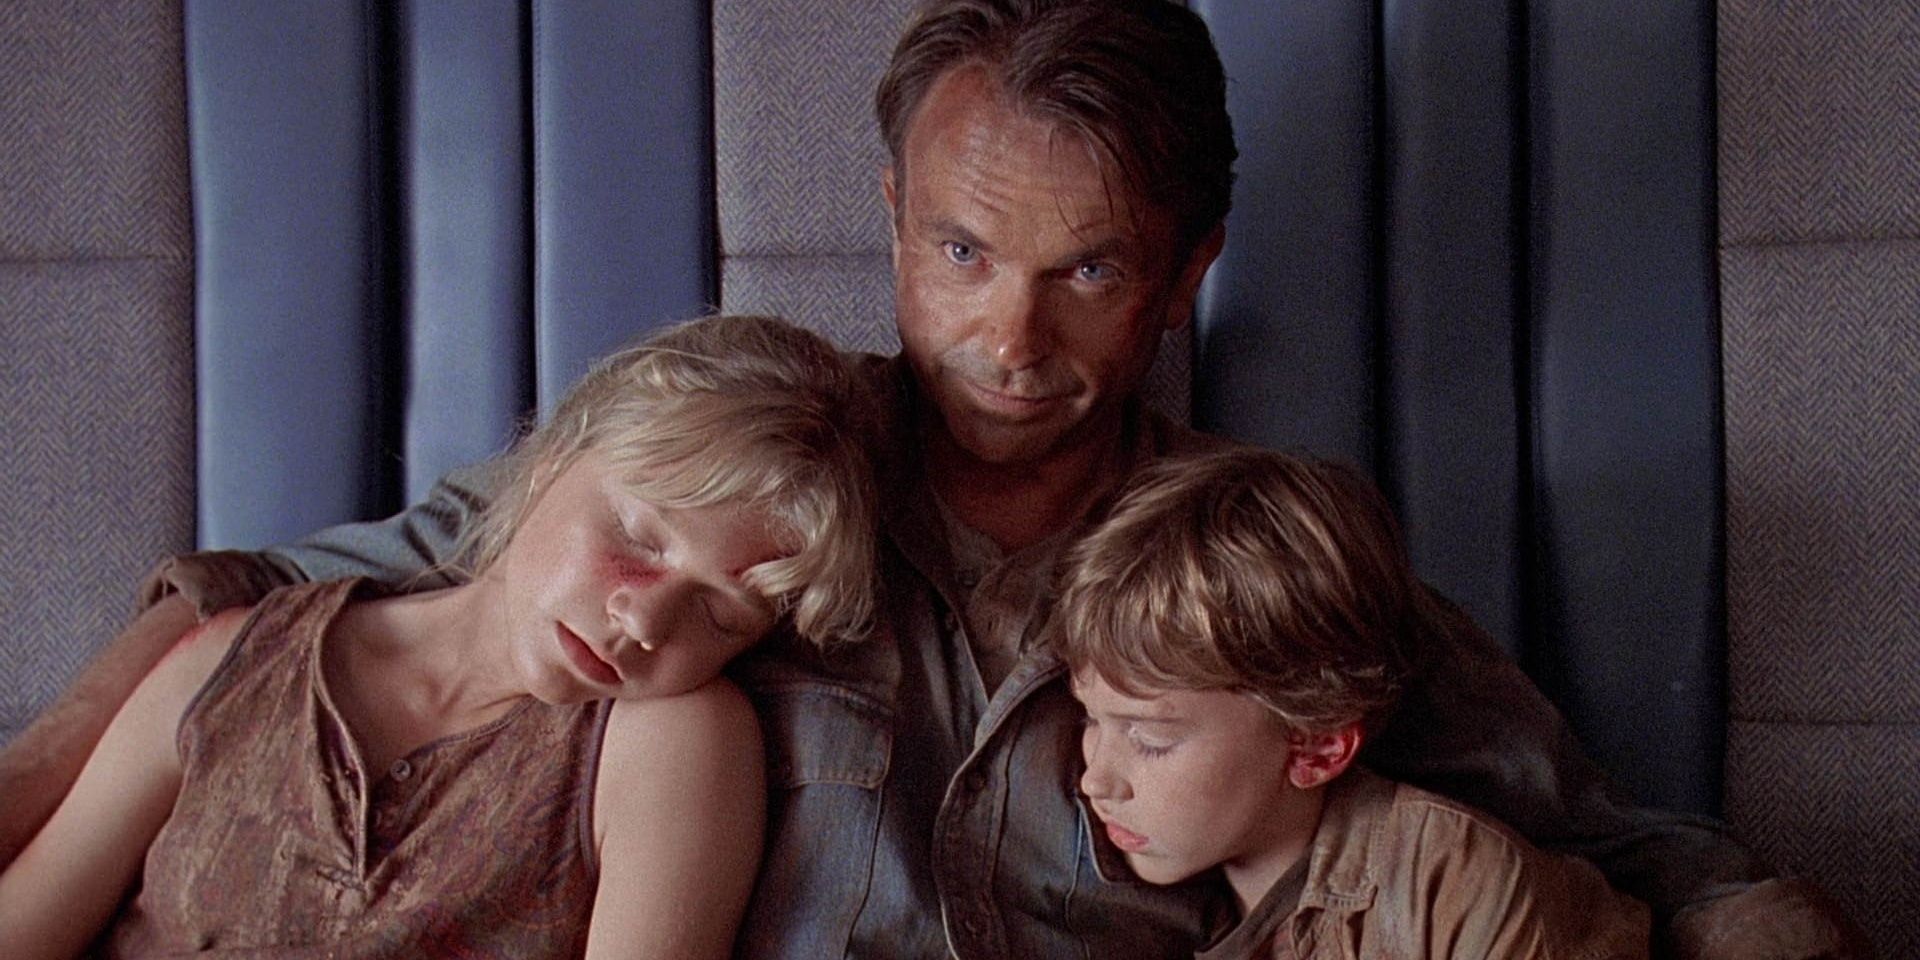 Lex and Tim sleeping next to Alan in Jurassic Park